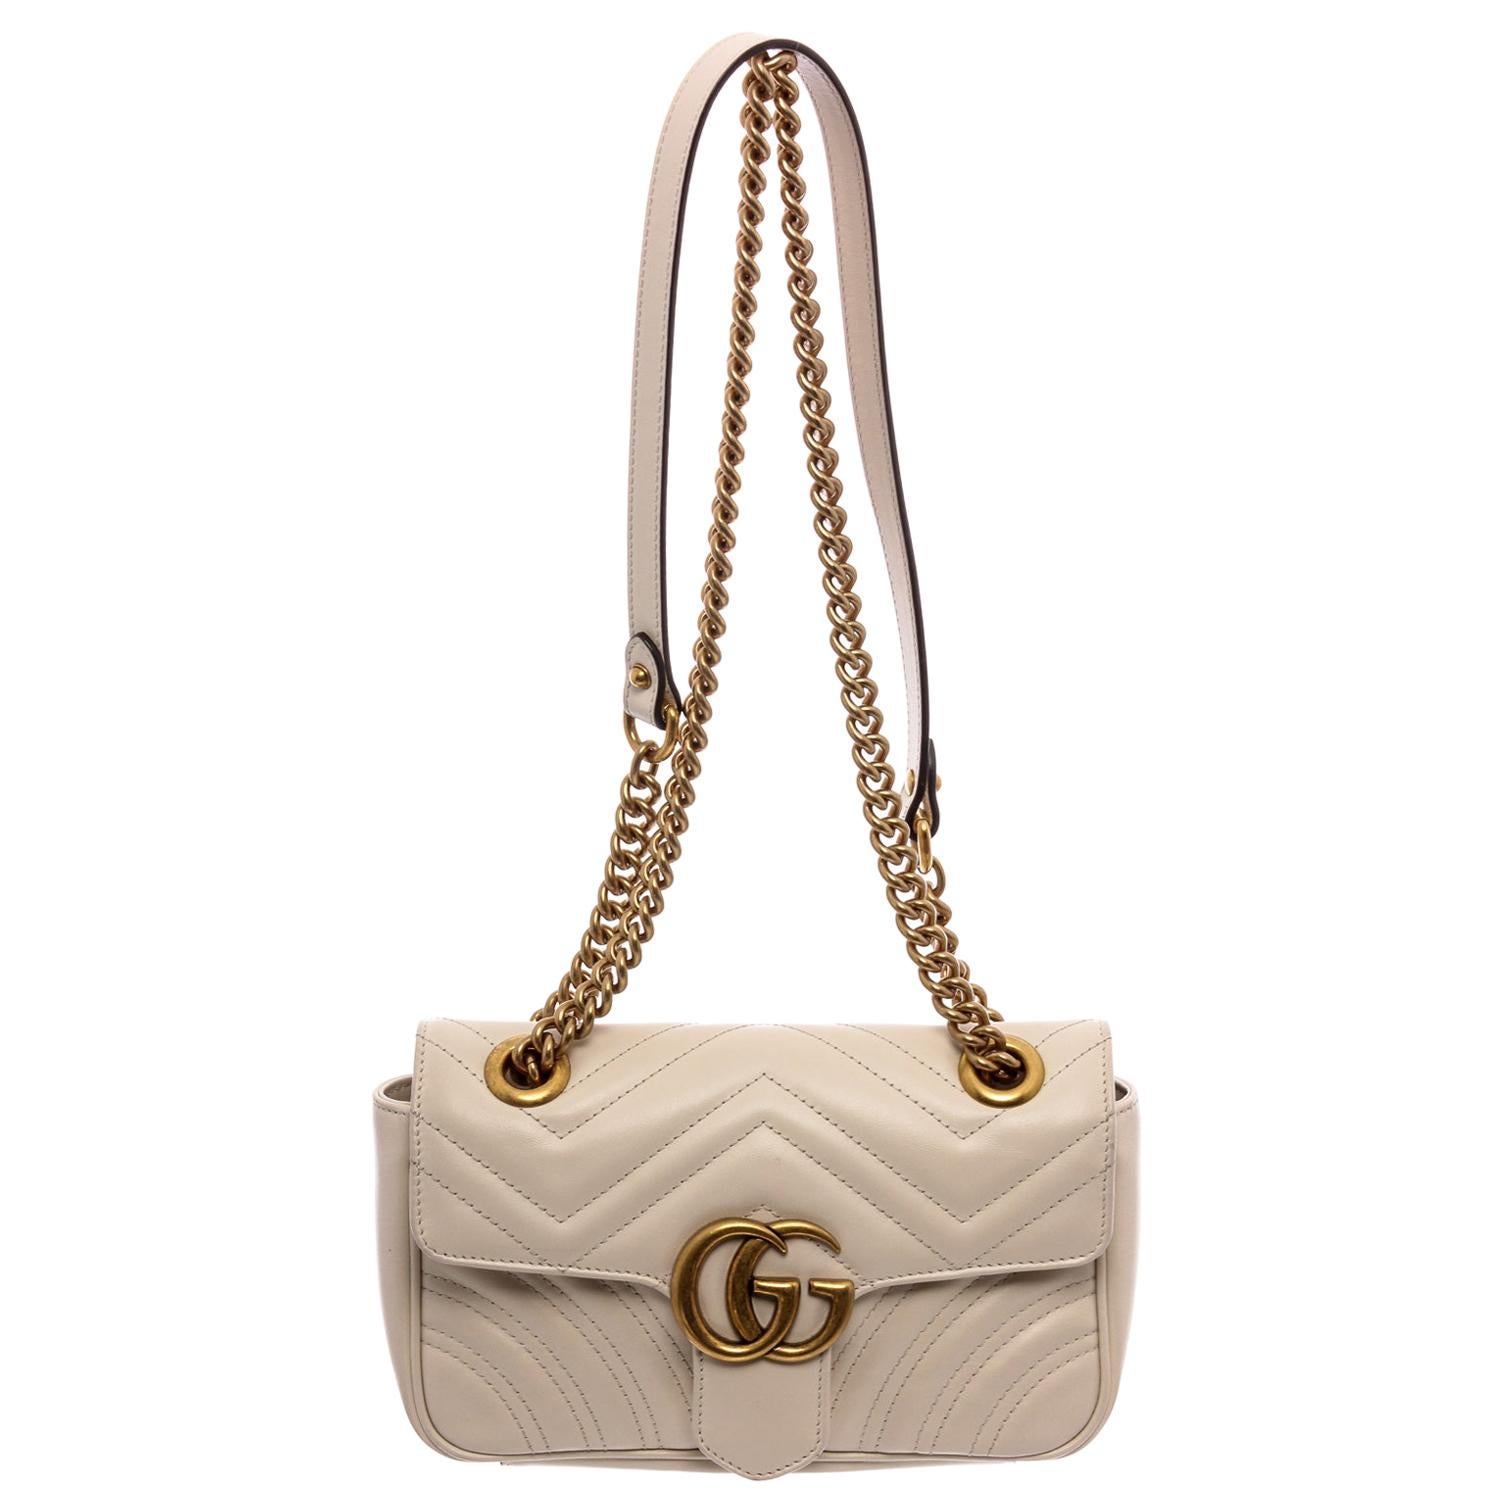 Gucci White Matelasse Leather Small GG Marmont Shoulder Bag